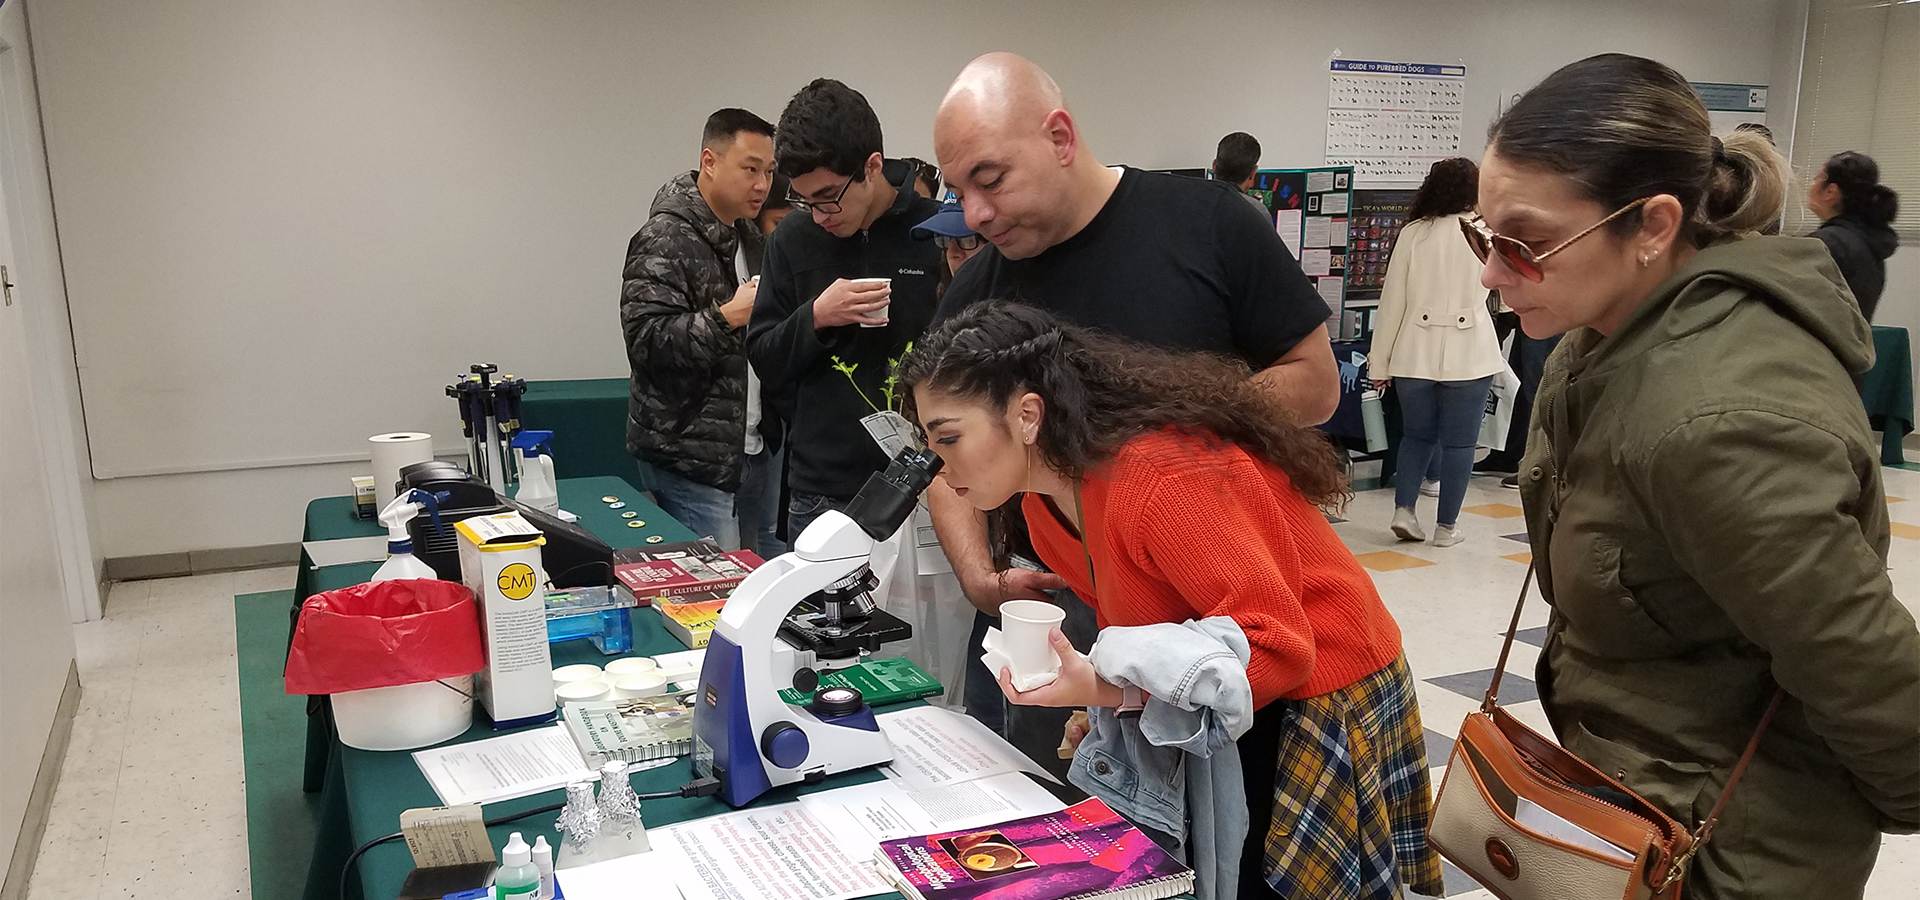 A young woman looks through a microscope at a 2020 Ag Open House display, while an older man and woman (presumably her parents) look on.